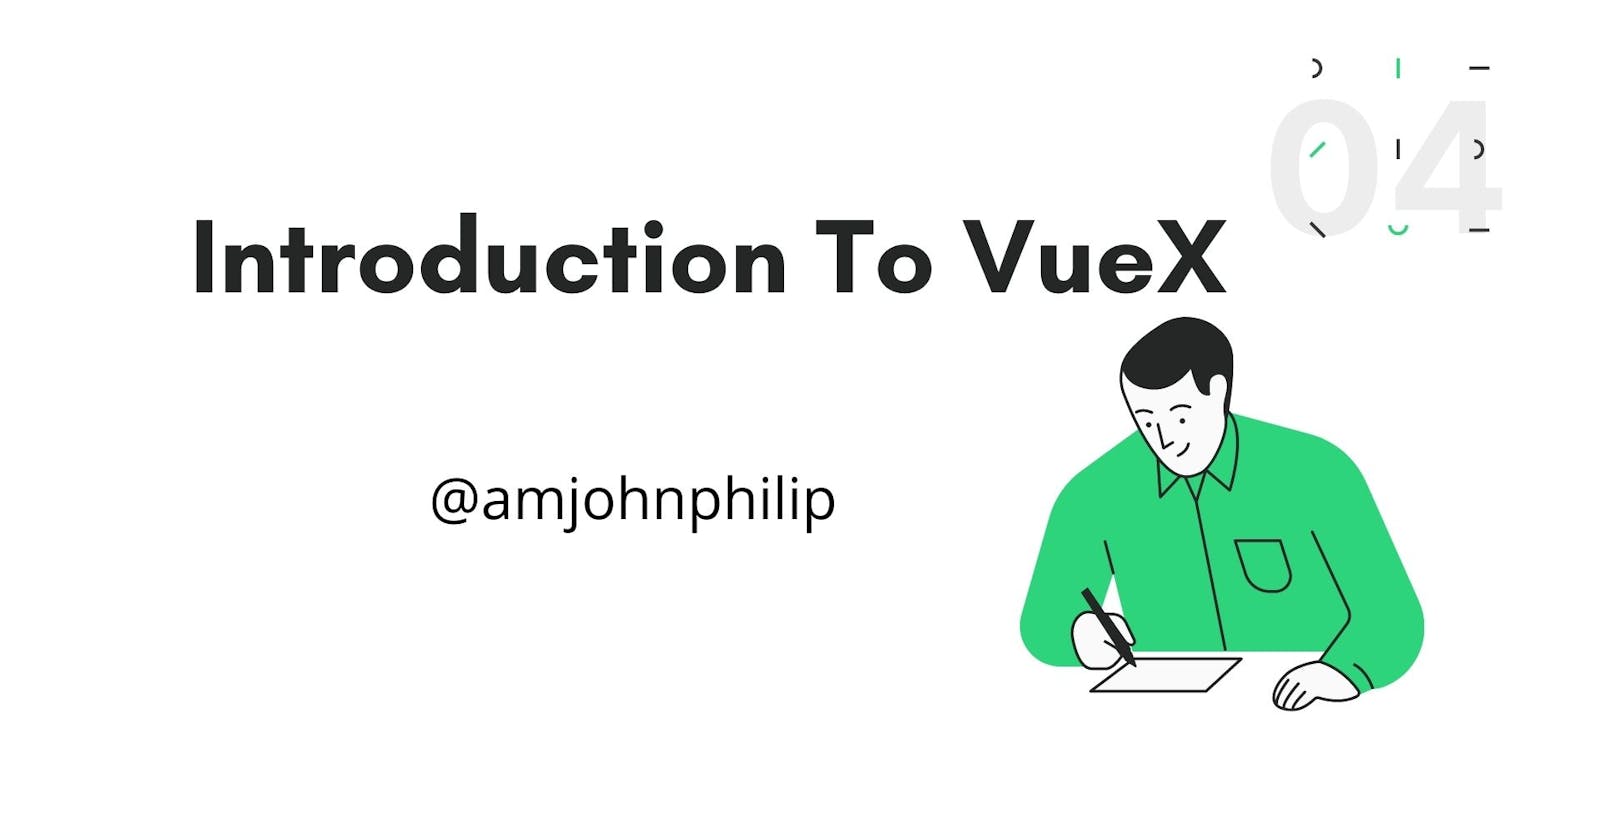 Introduction To VueX